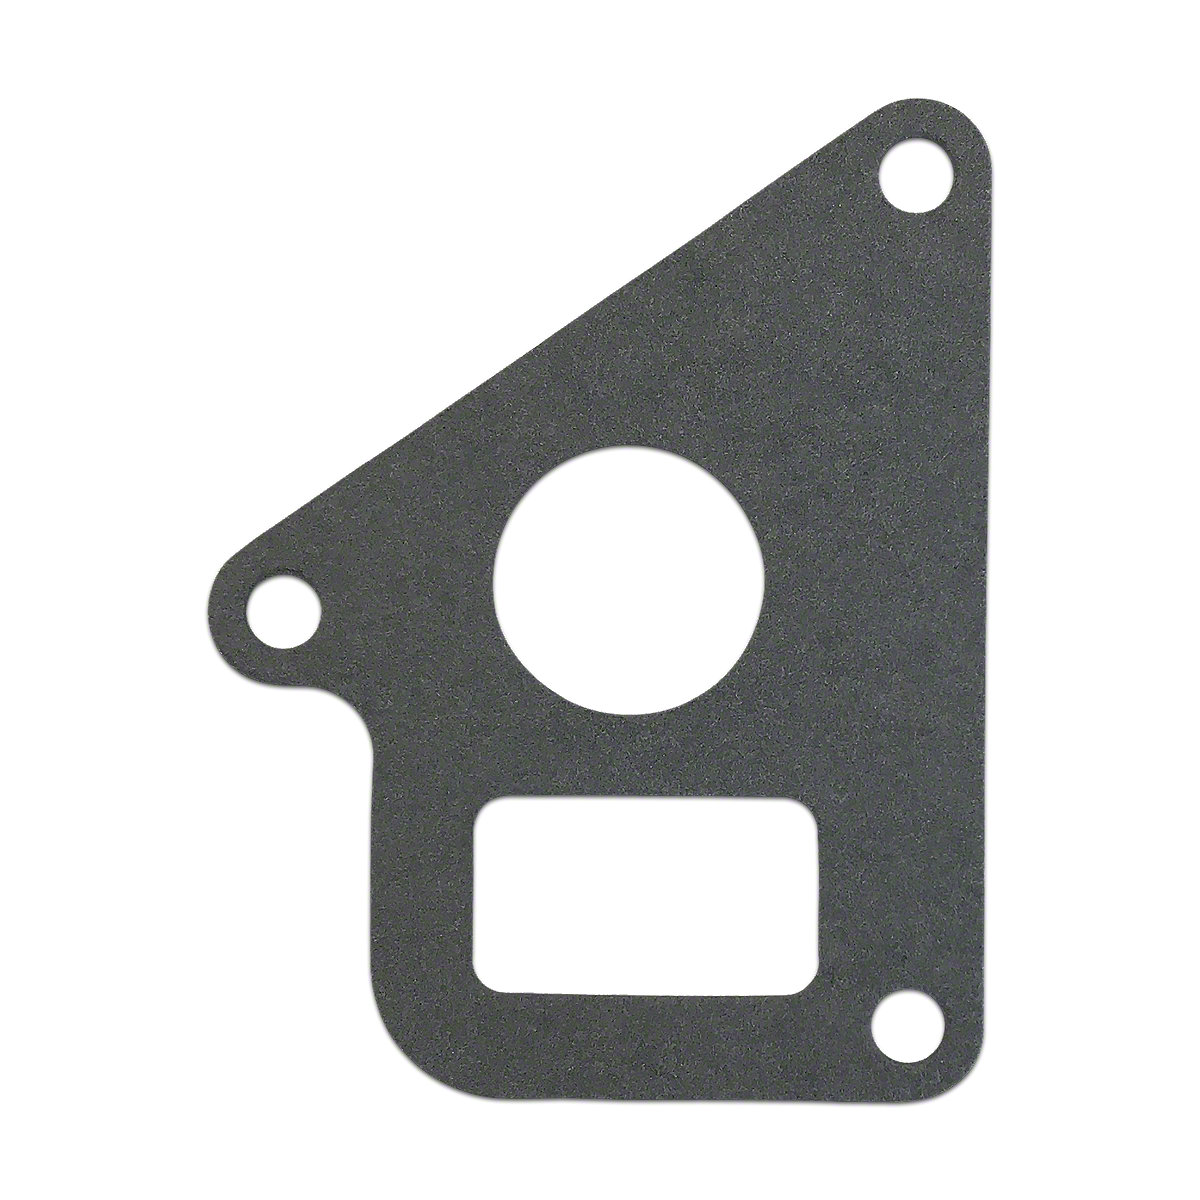 Water Pump Plate Gasket - 140  200  230  240  330  340 and more